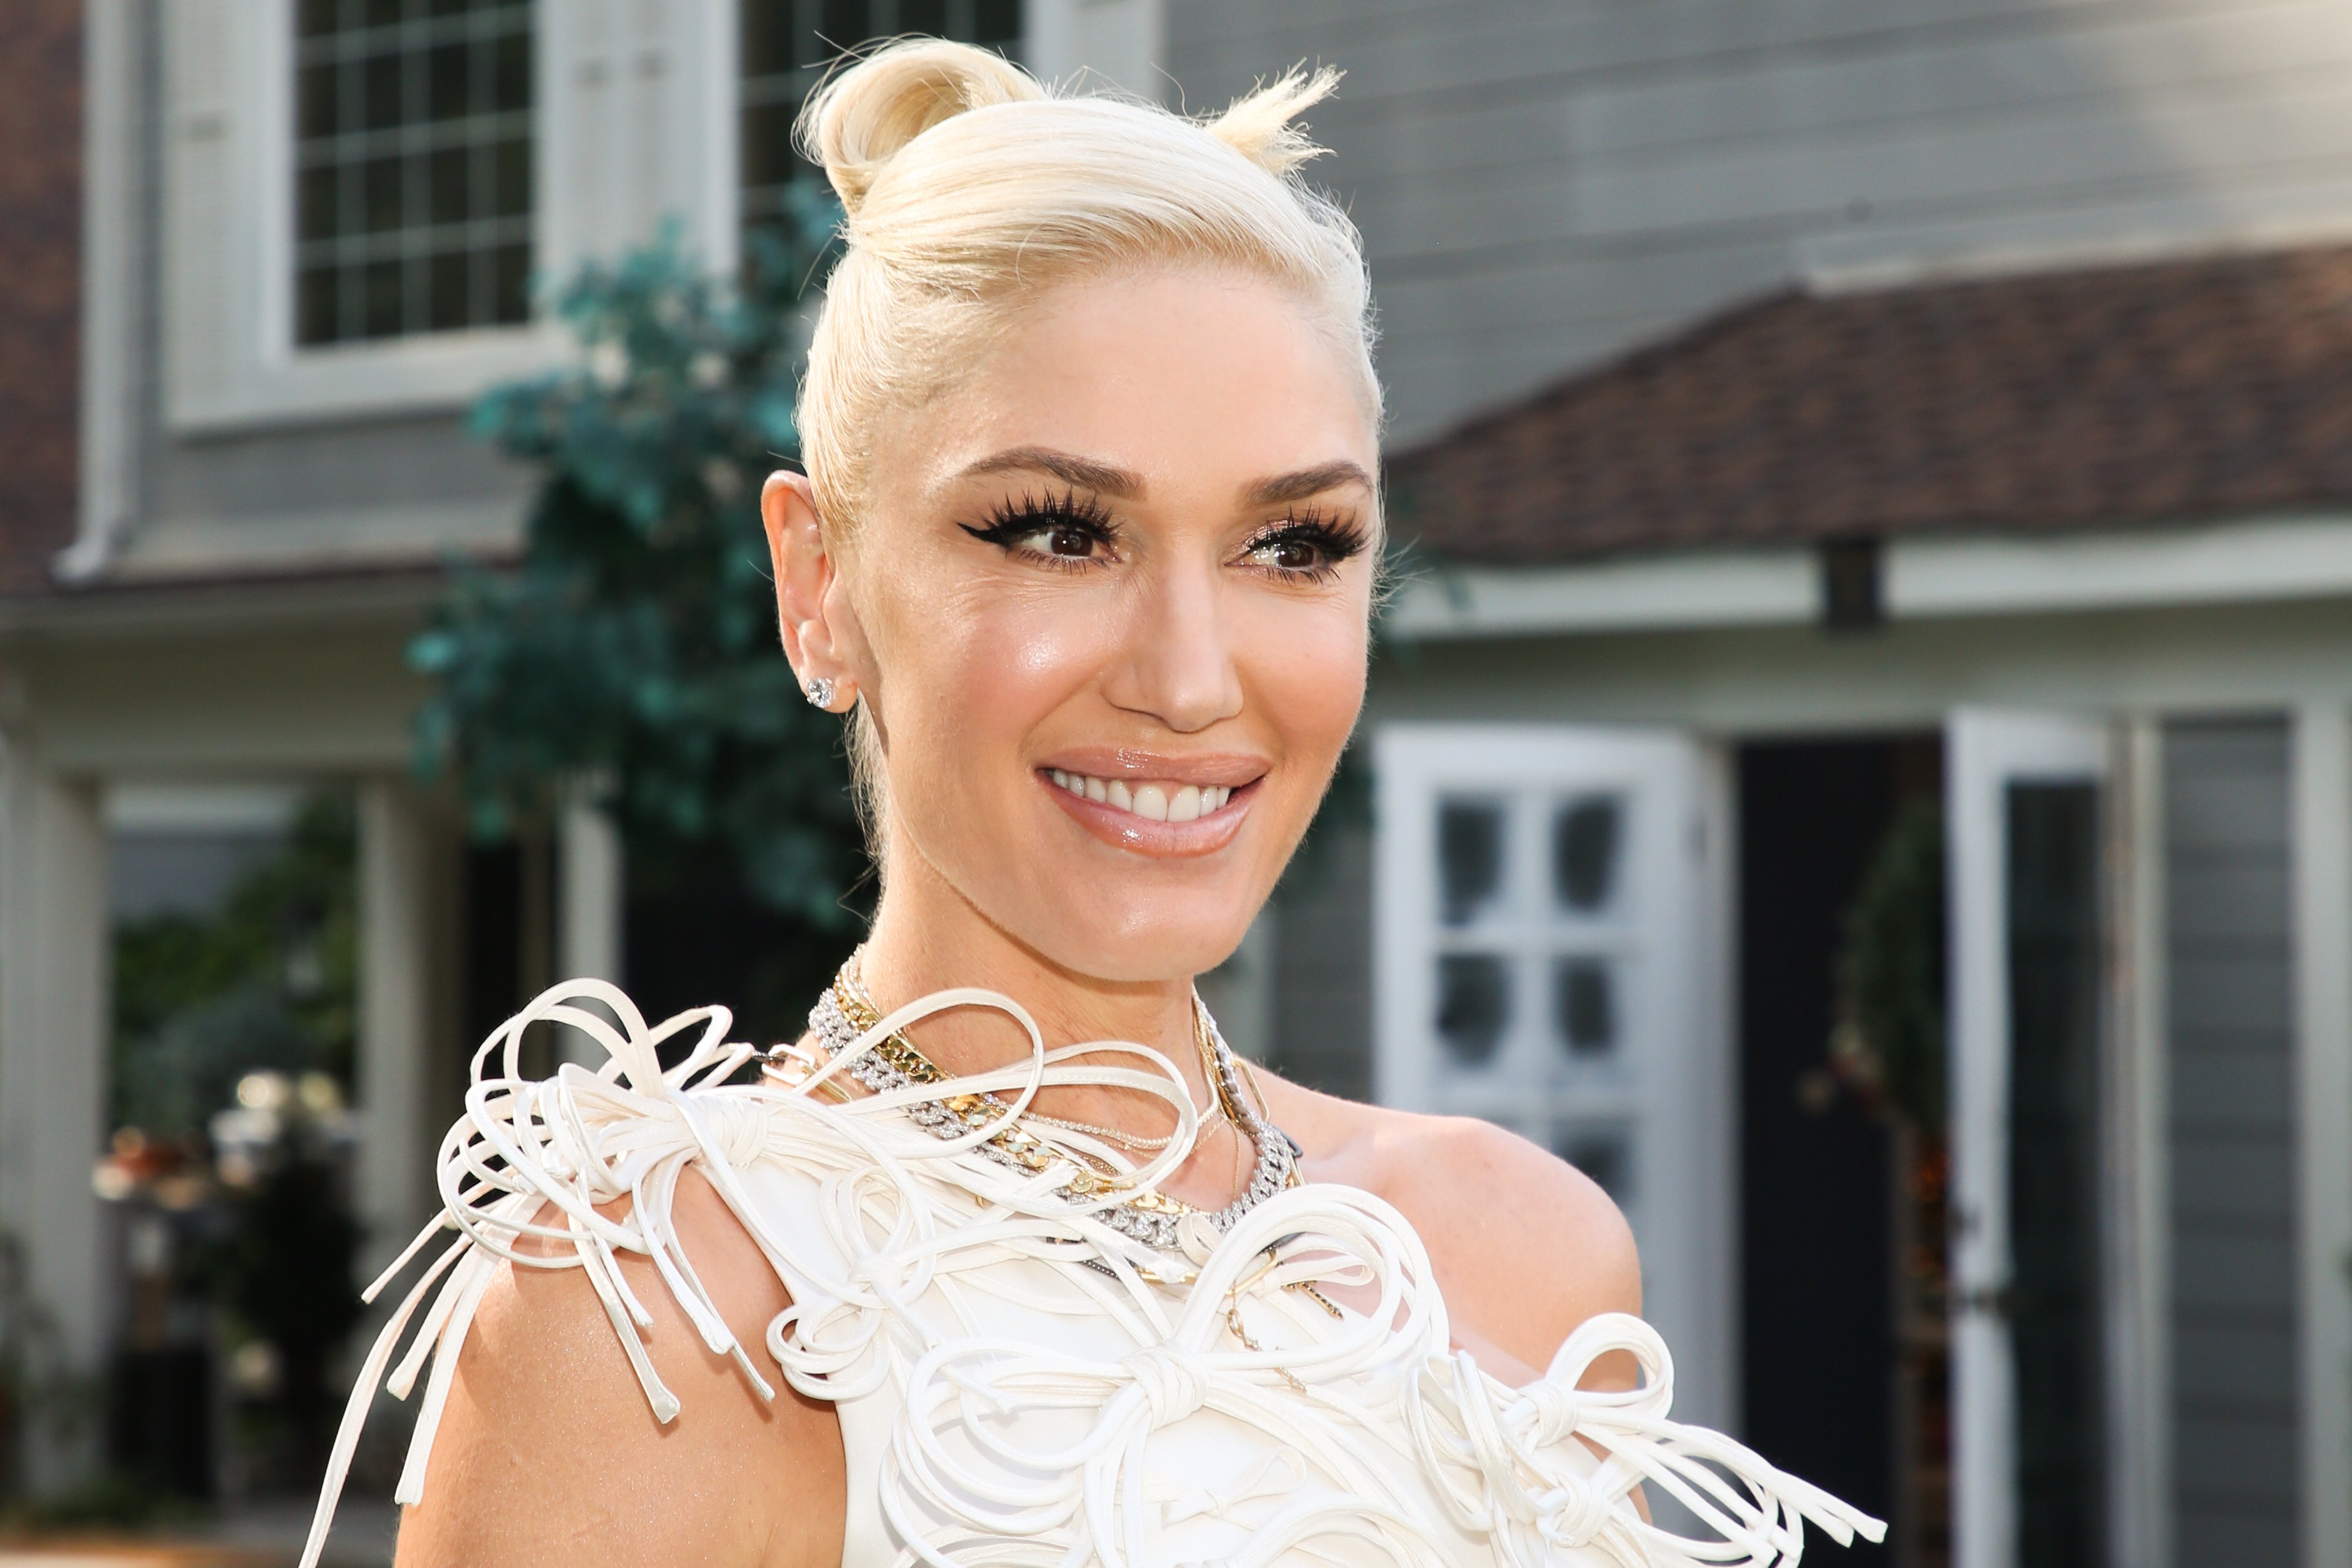  Gwen Stefani visits Hallmark Channel's "Home & Family" on December 02, 2020 in Universal City, California. | Source: Getty Images